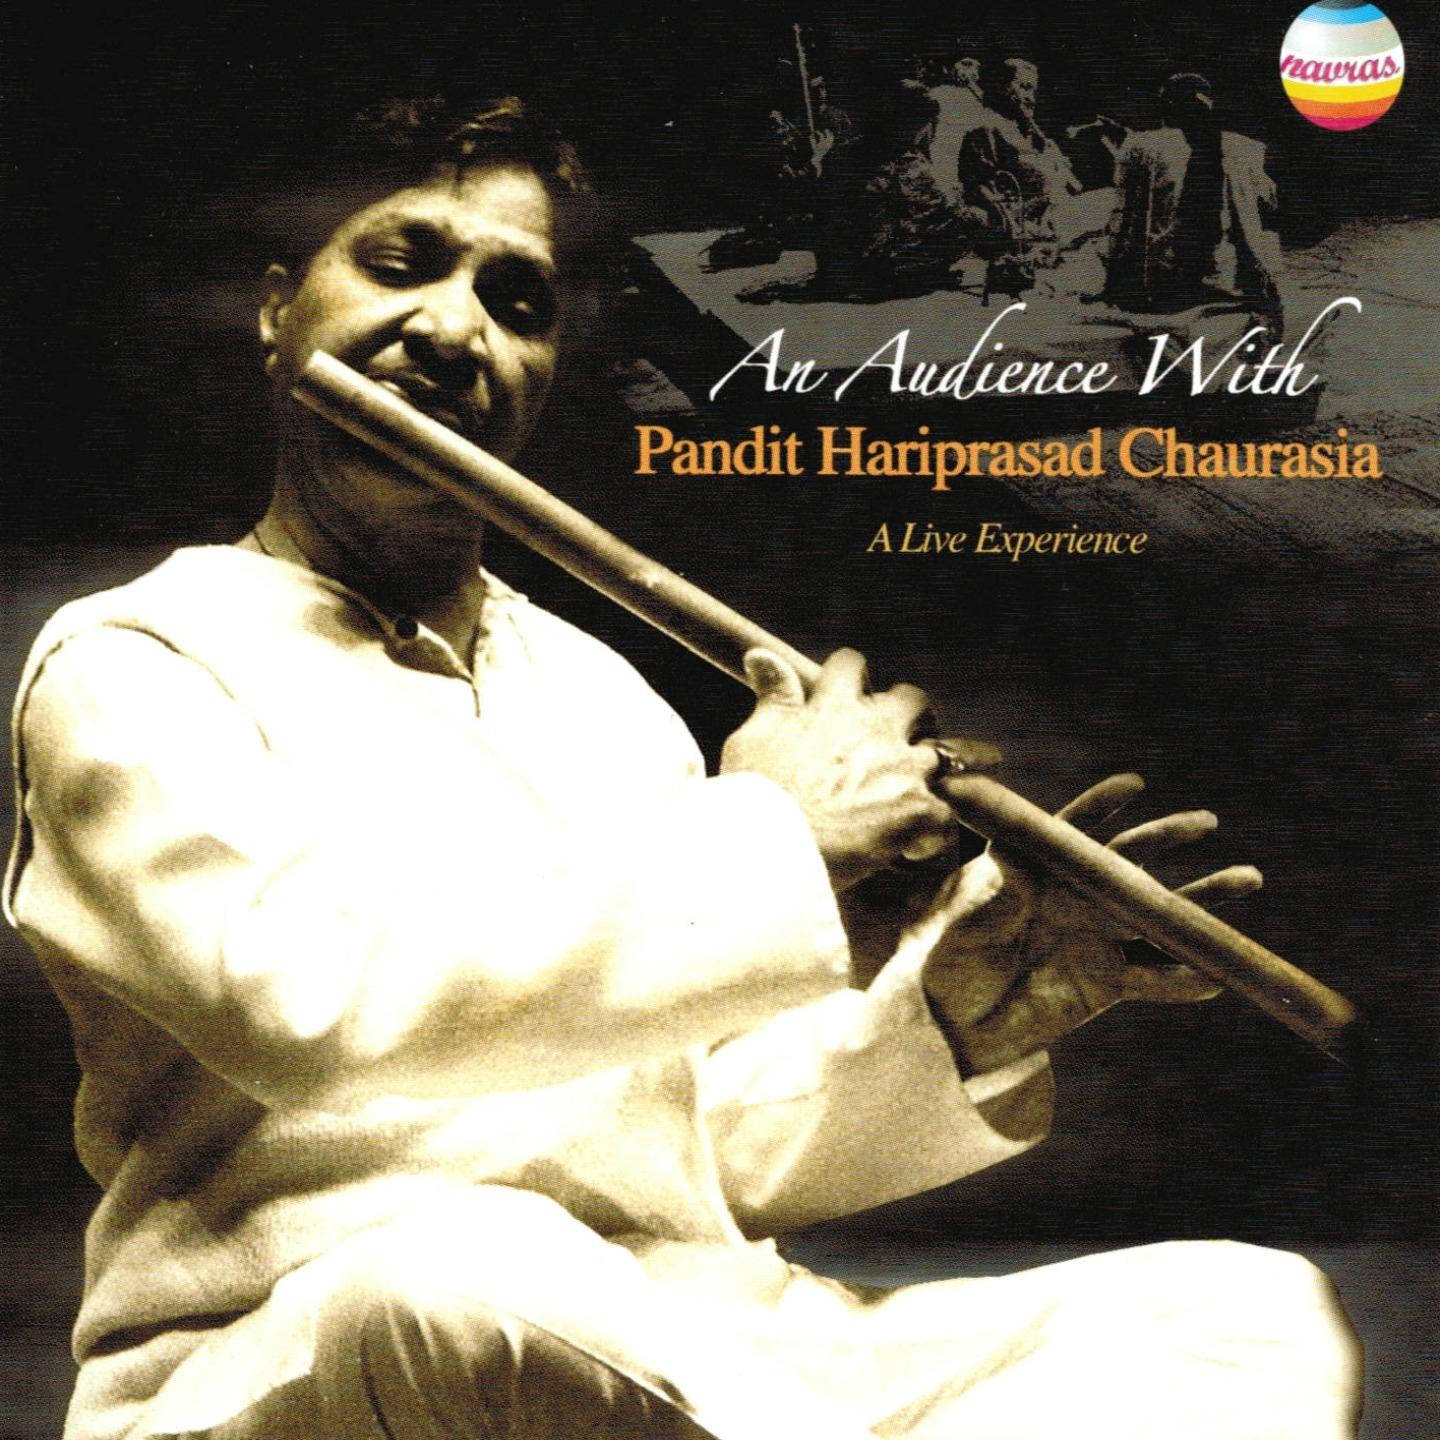 An Audience With Pandit Hariprasad Chaurasia (A Live Experience)